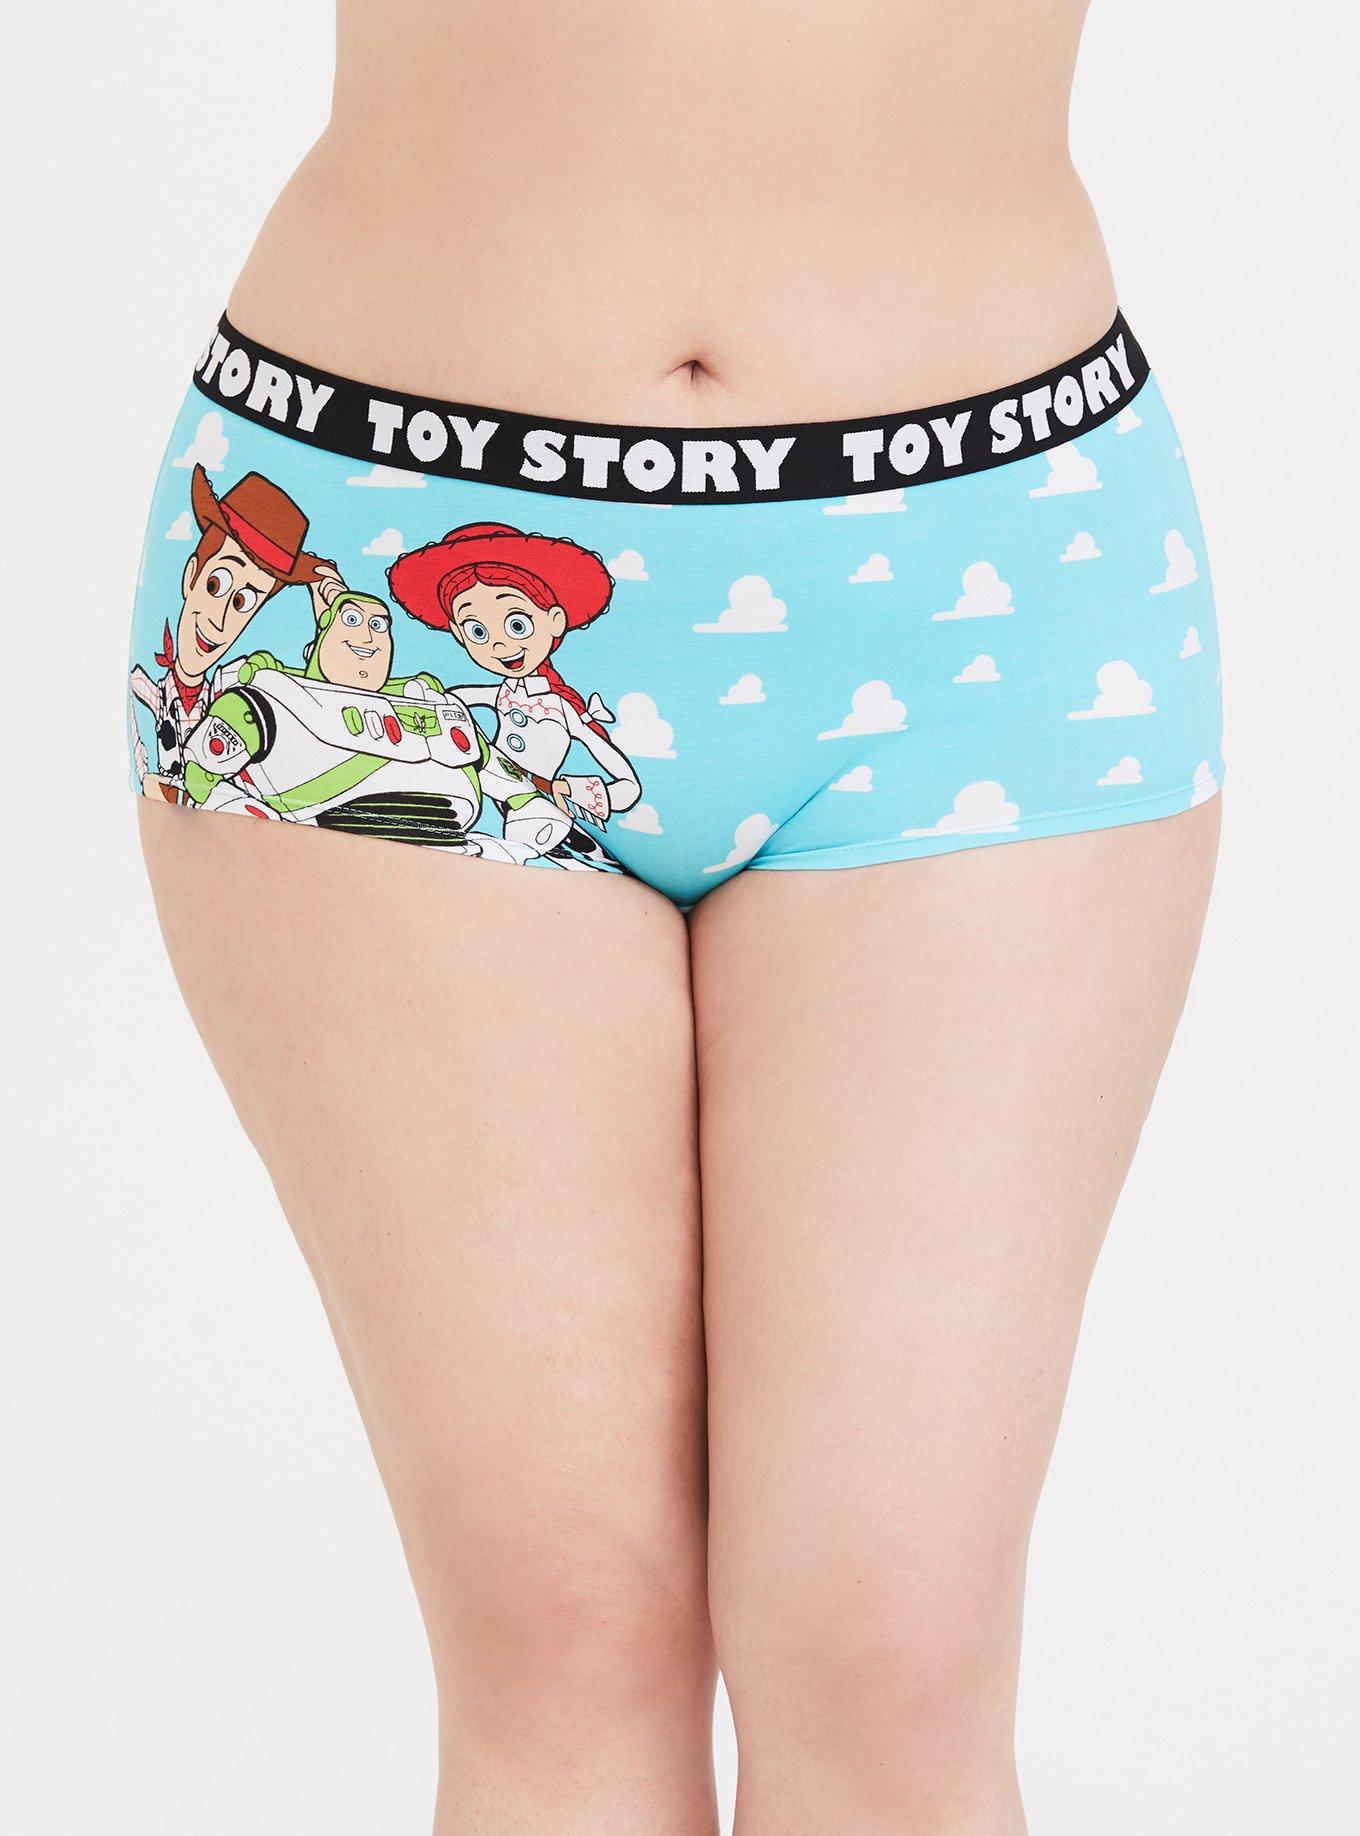 Cheeky and Playful Toy Story Buzz Lingerie - 3 for £10